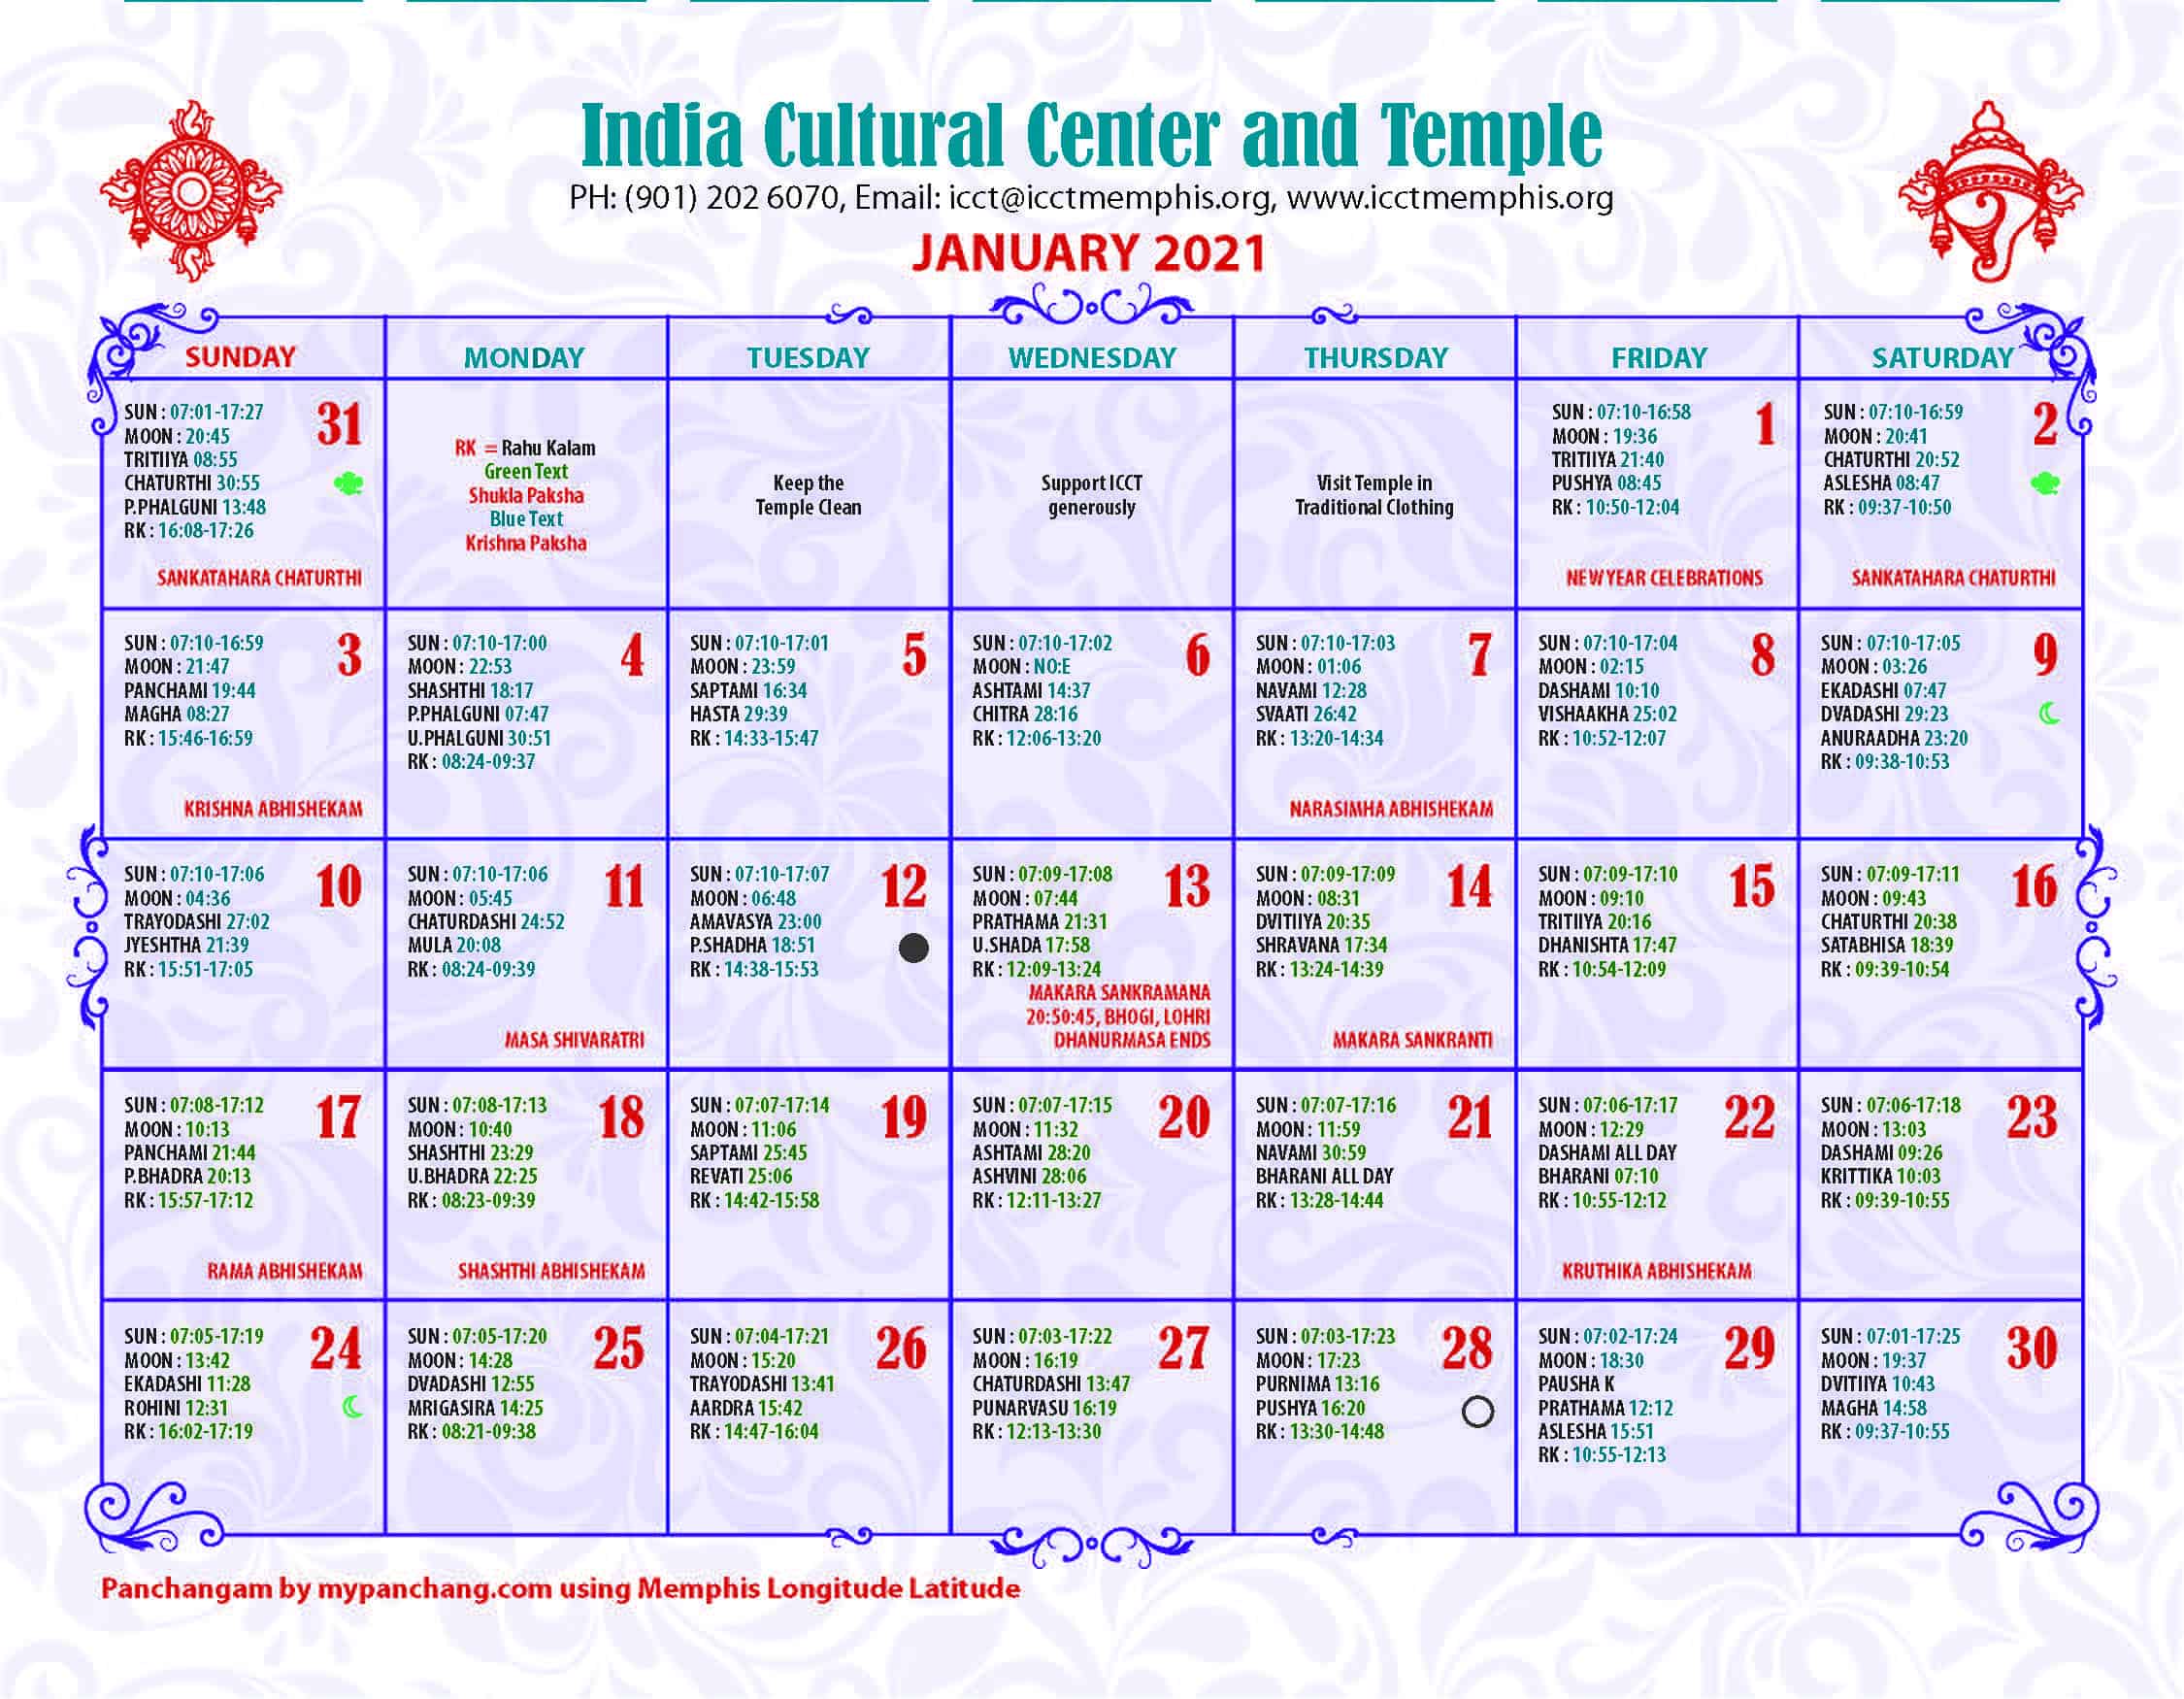 Temple Calendar 2021 India Cultural Center and Temple